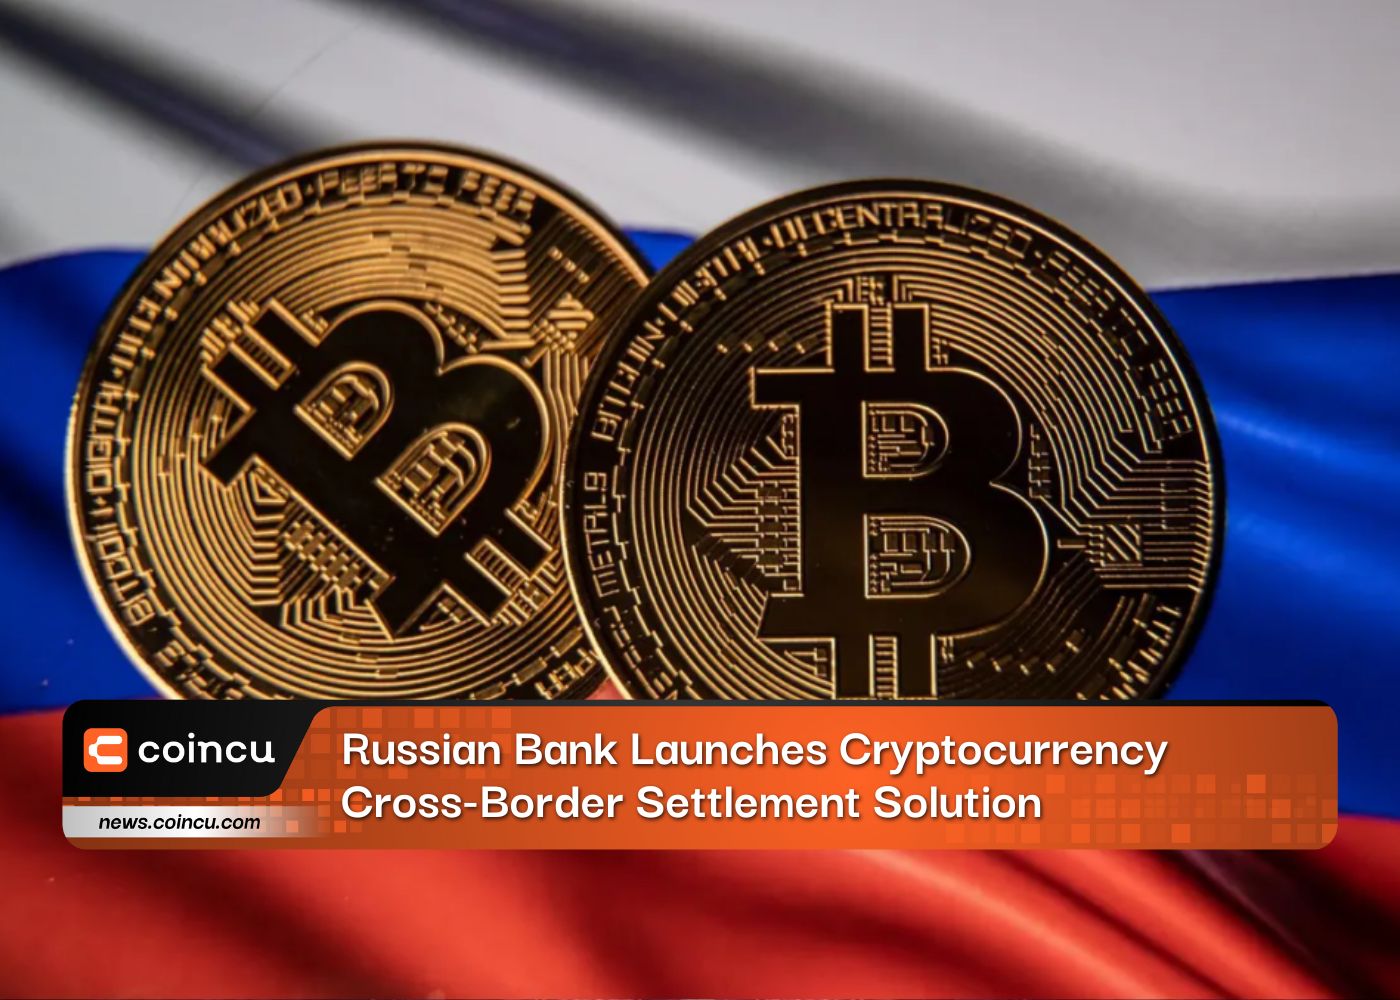 Russian Bank Launches Cryptocurrency Cross-Border Settlement Solution